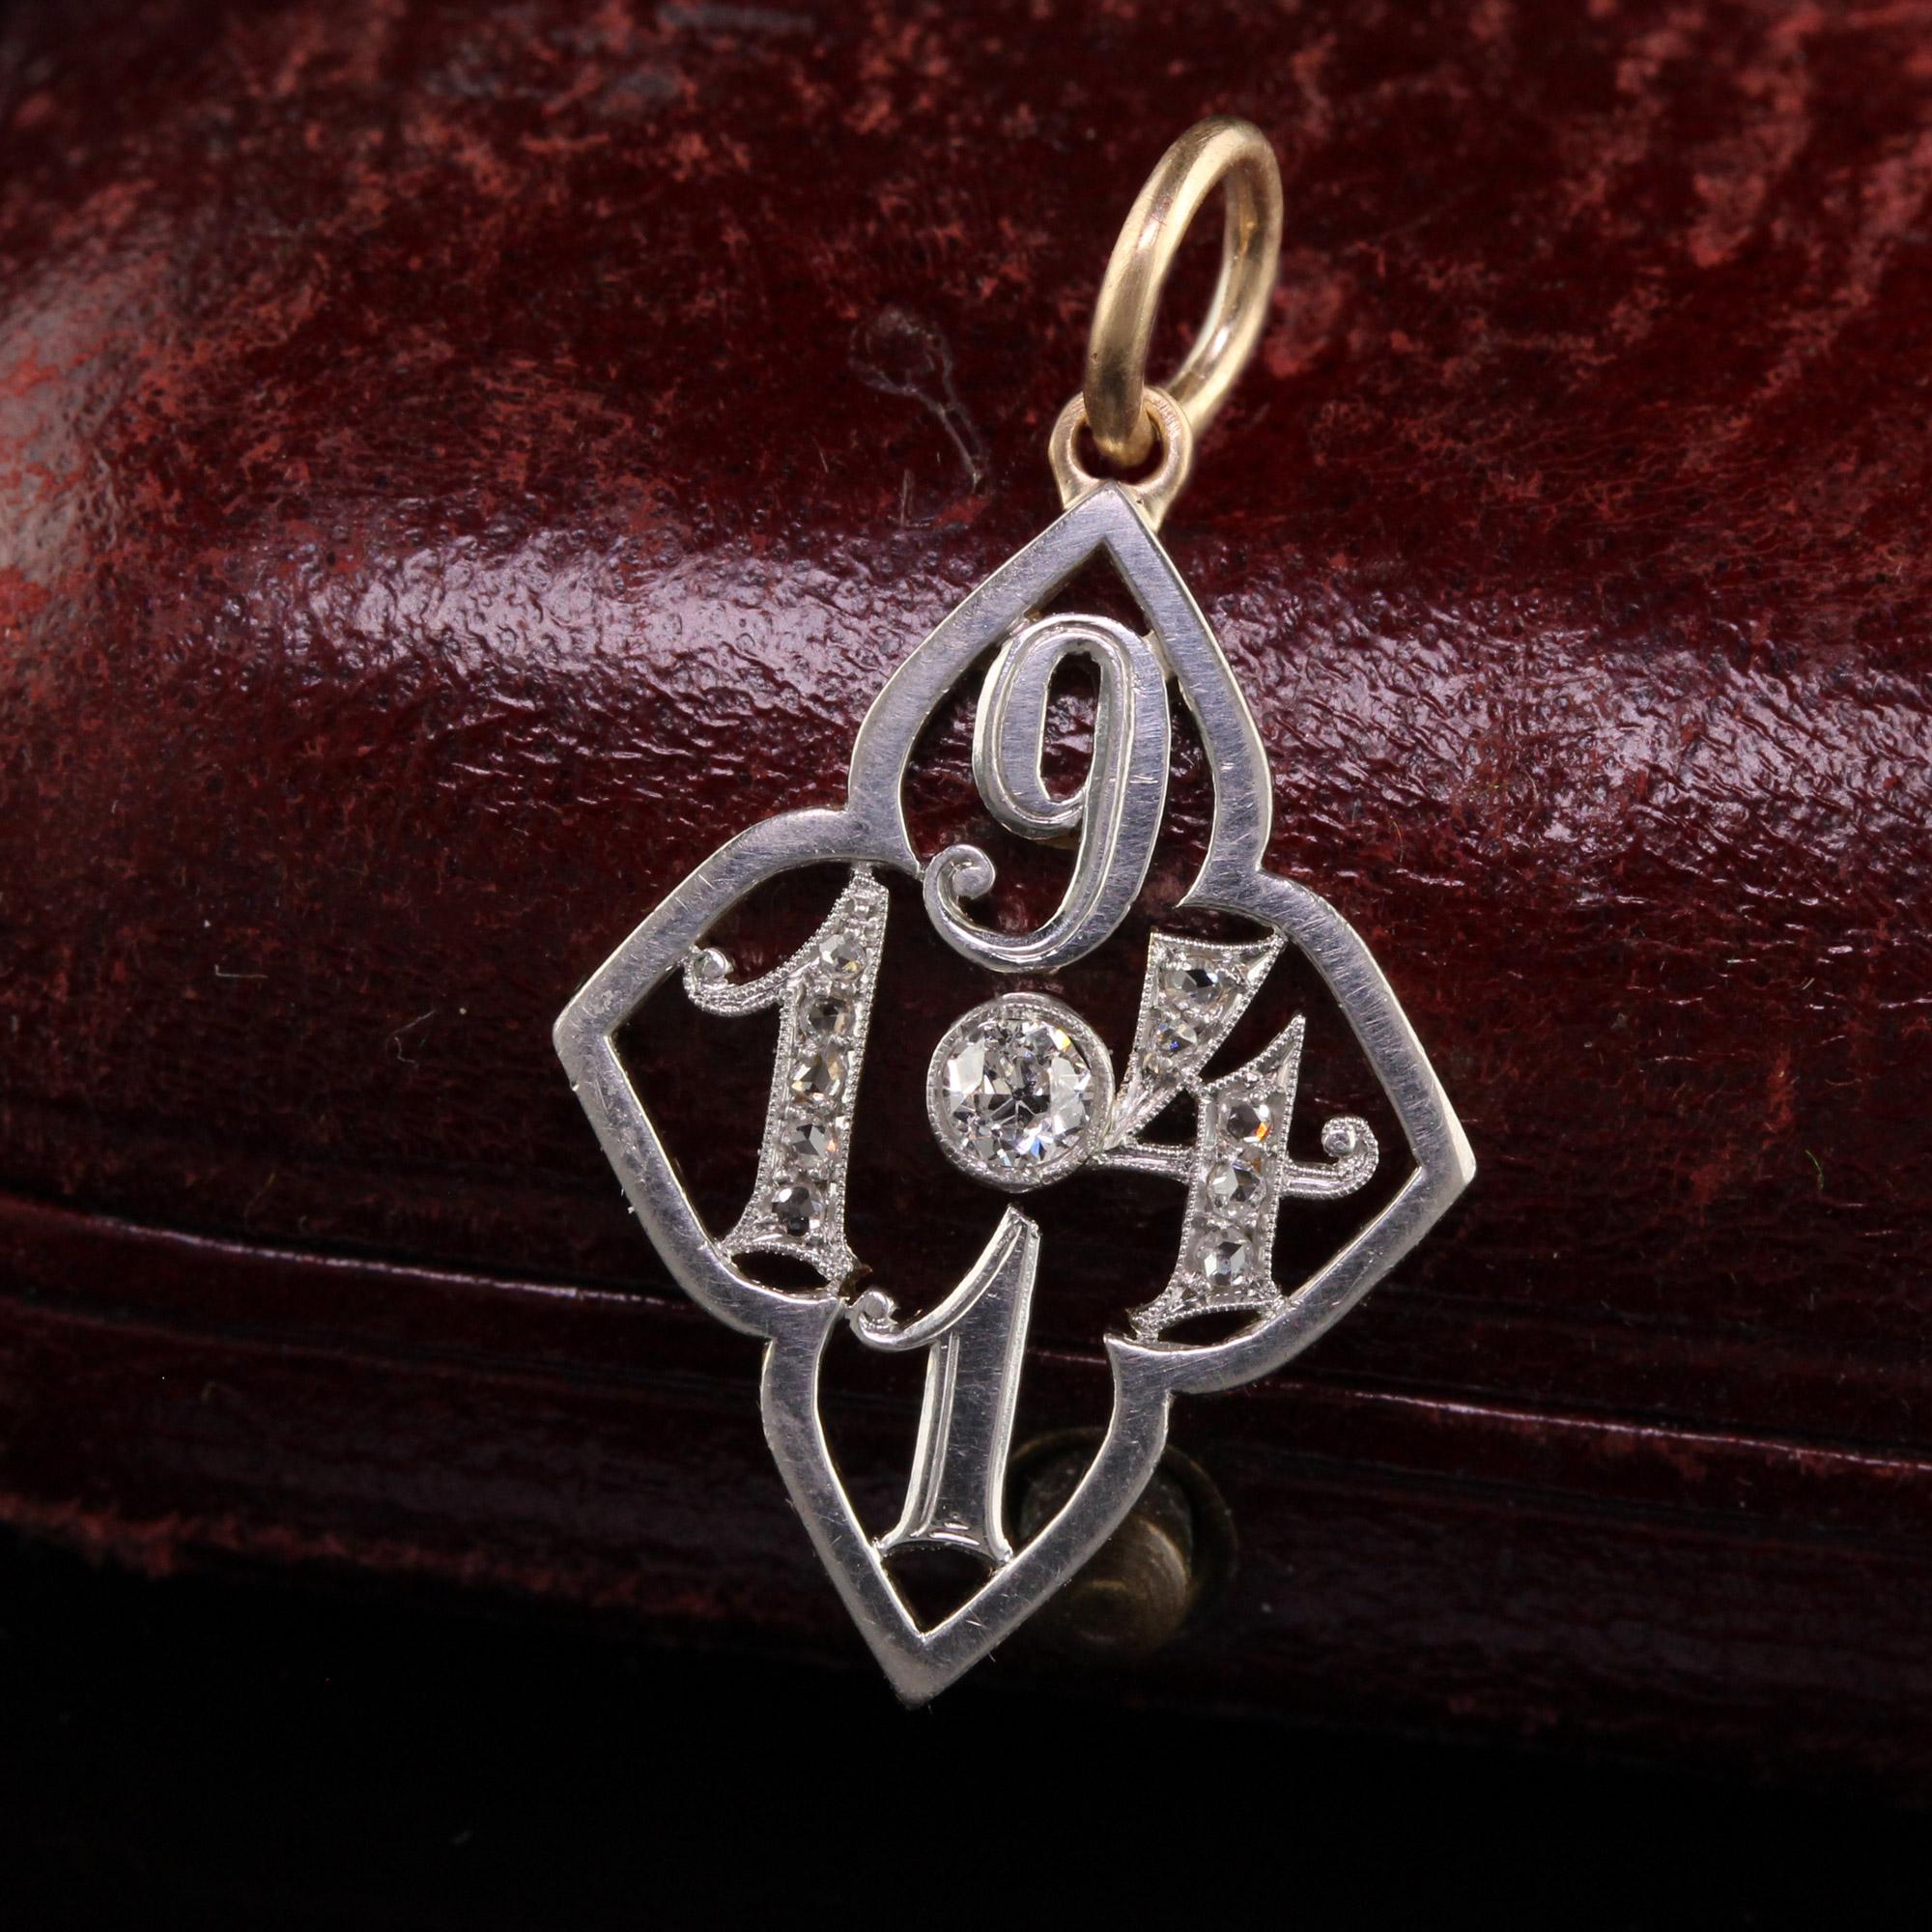 Beautiful Antique Edwardian Platinum and 18K Yellow Gold 1914 Date Charm Pendant. This beautiful pendant is crafted in platinum and 18k yellow gold. The pin has old european cut diamonds set in the date 1914 and is in great condition. This was